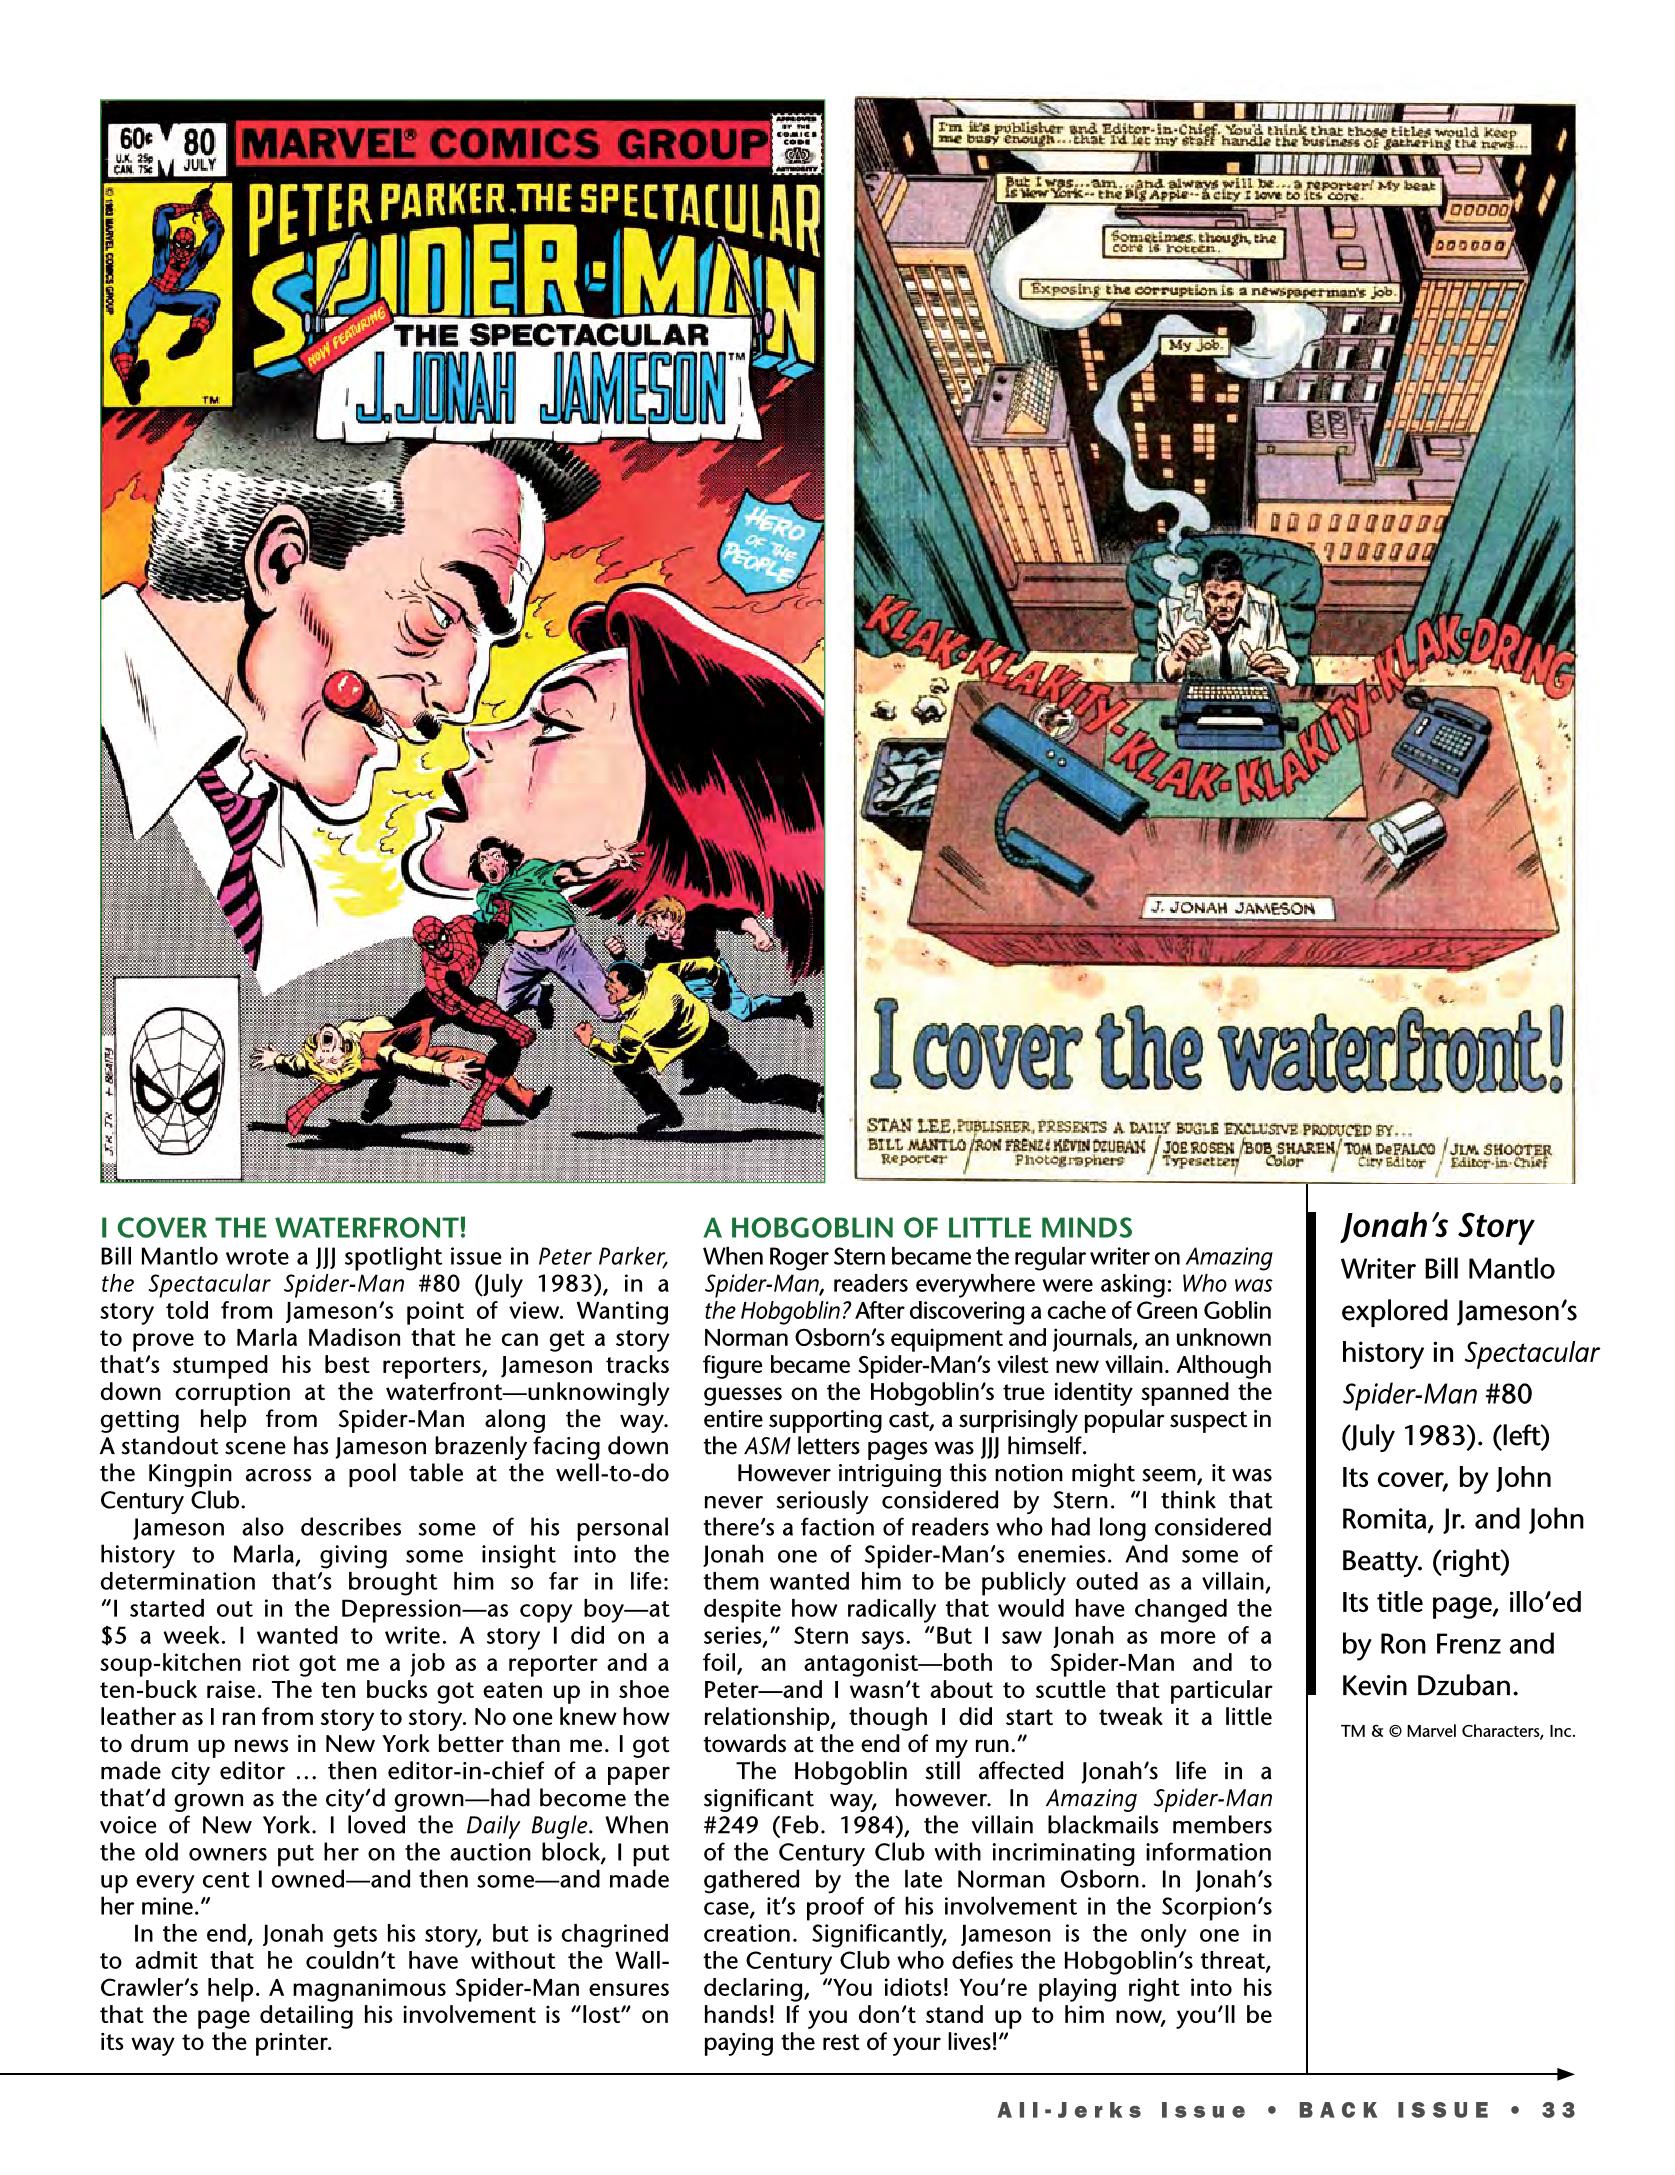 Read online Back Issue comic -  Issue #91 - 29